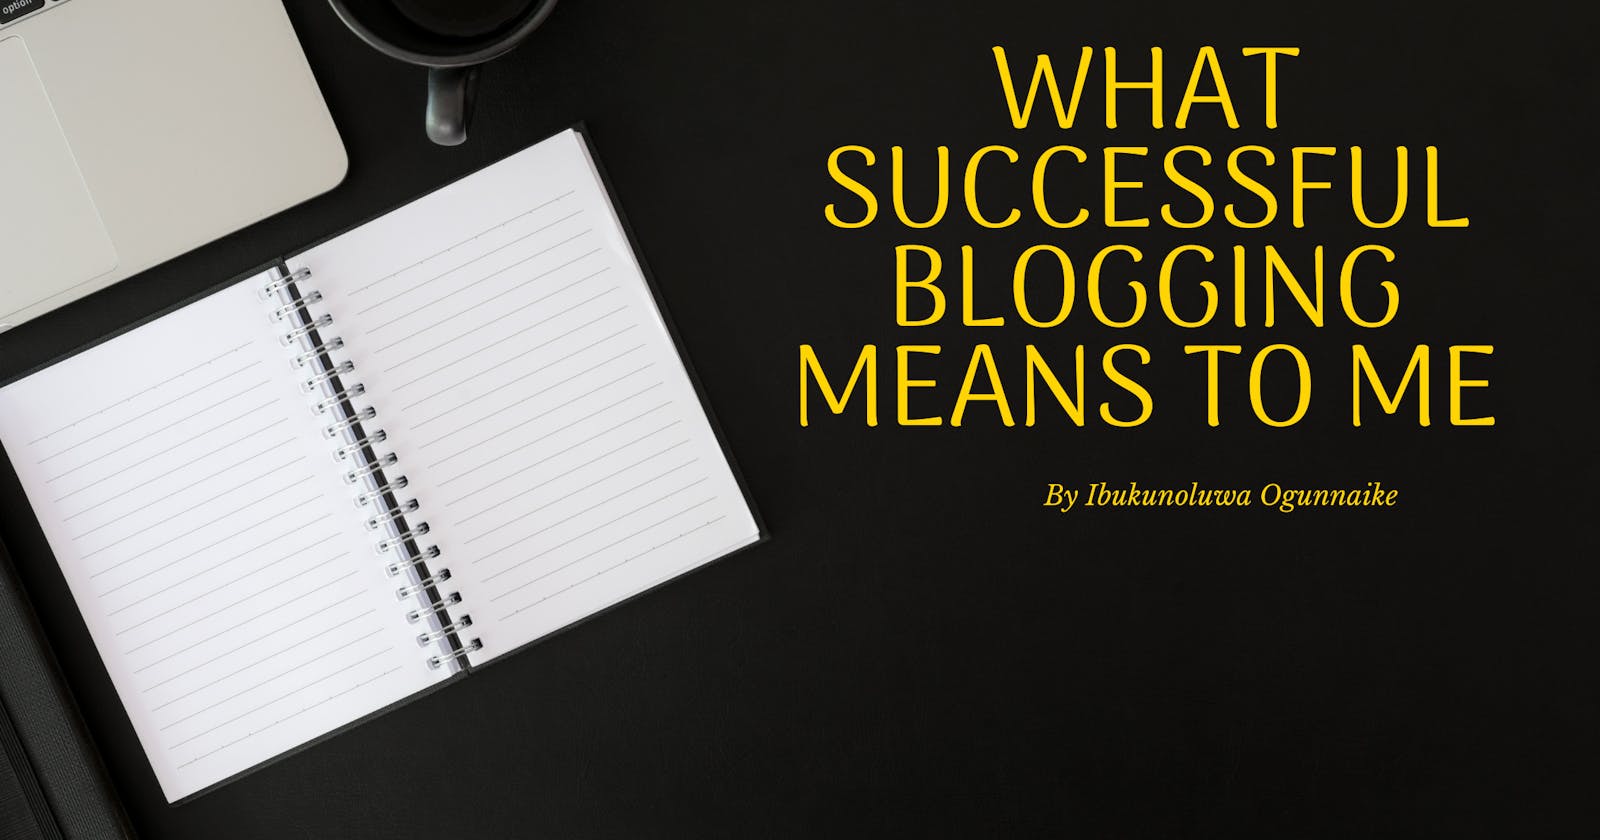 What Successful Blogging Means To Me